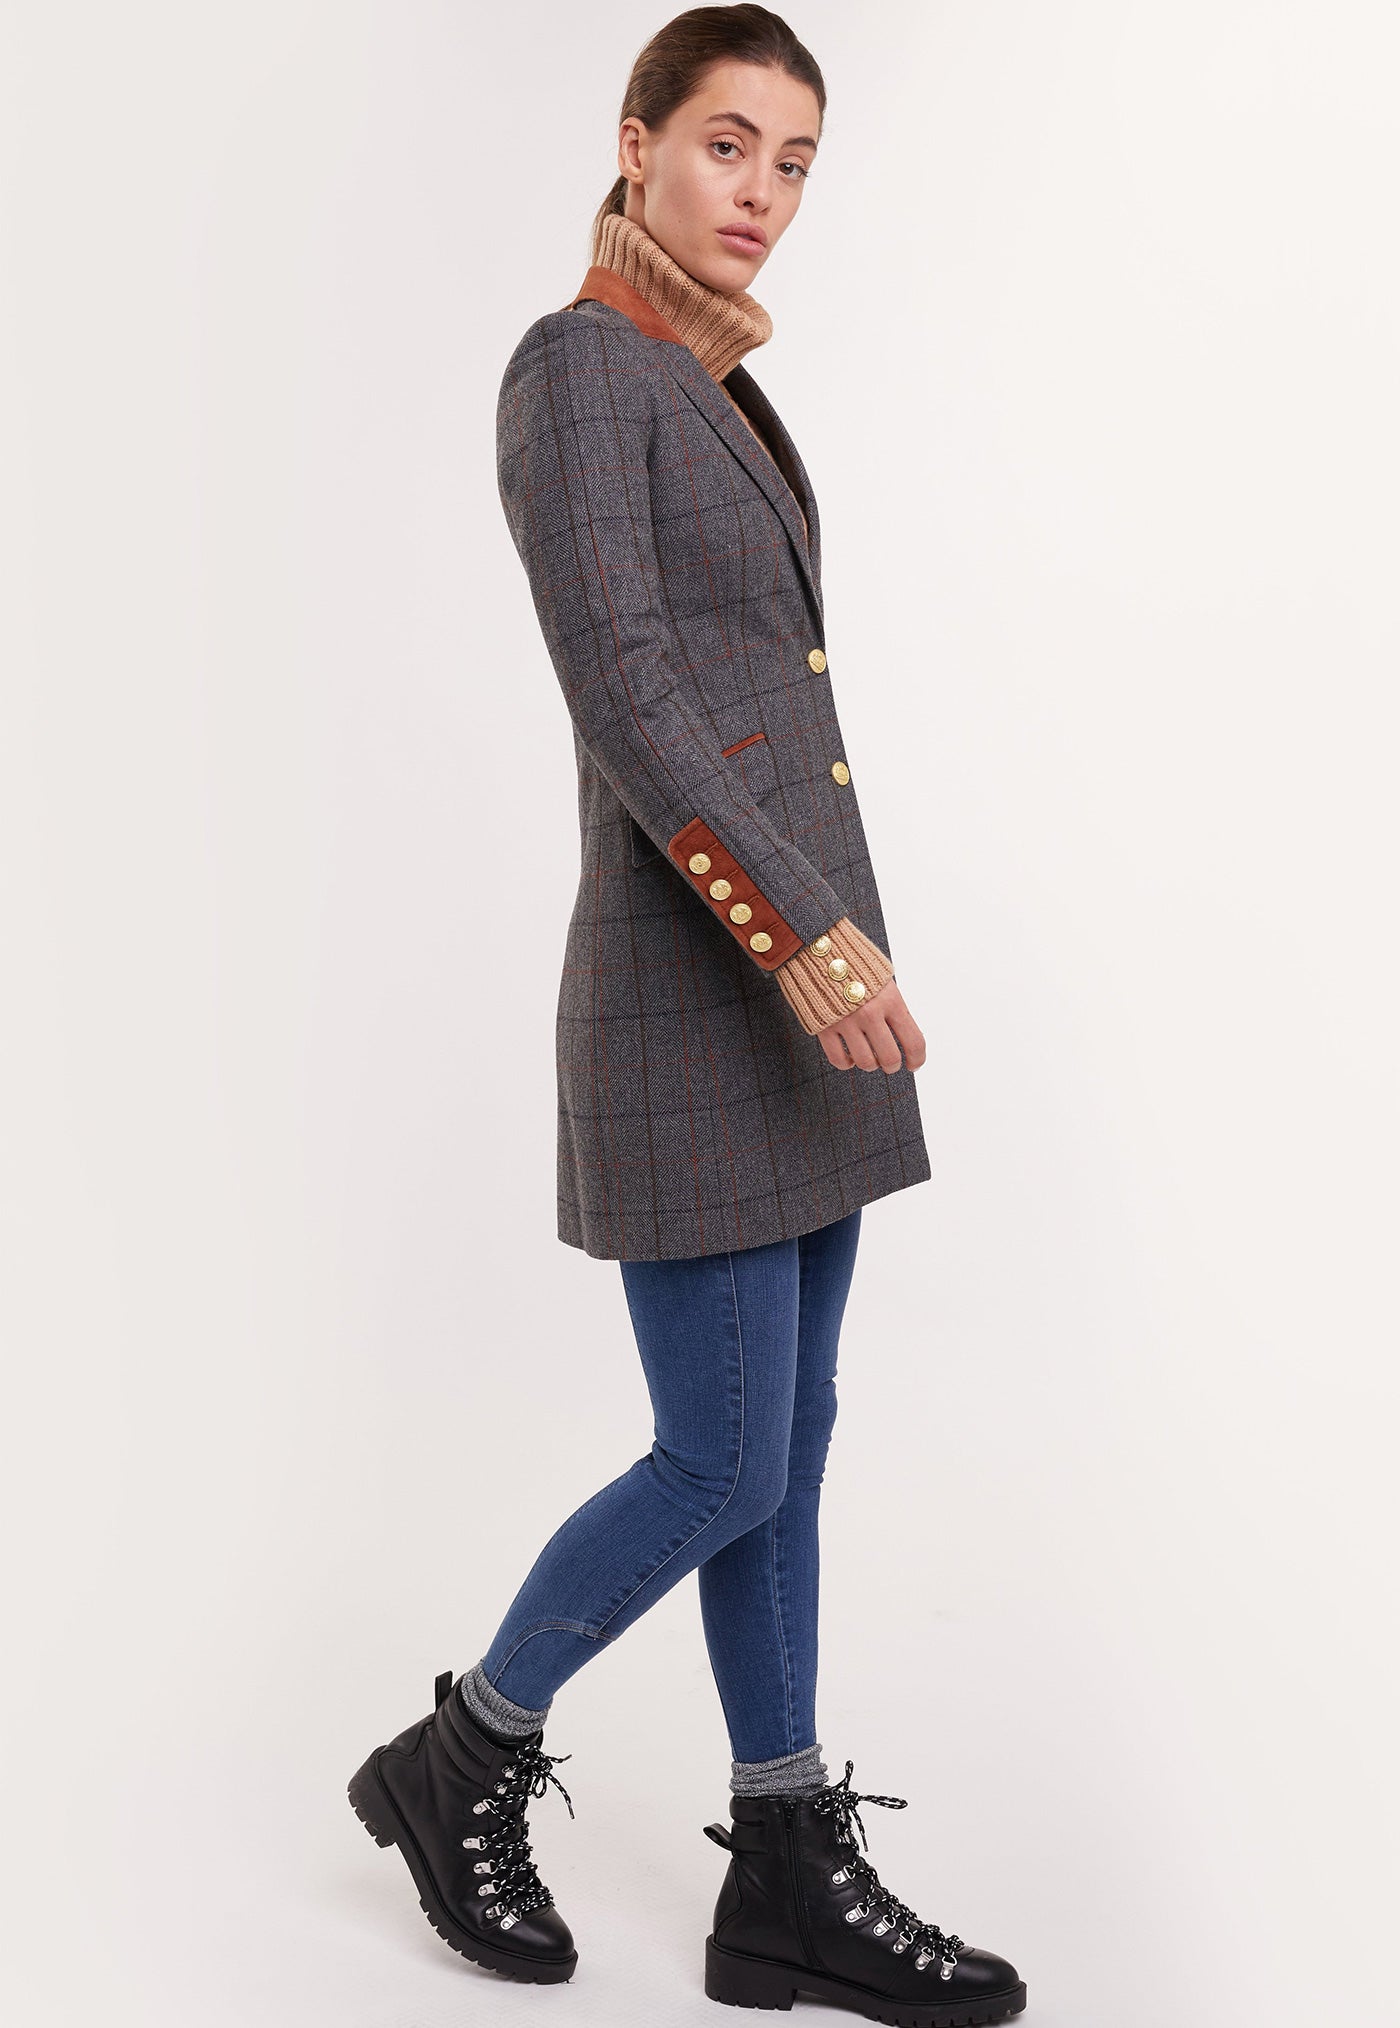 Kempton Coat - Mid Blue Check sold by Angel Divine